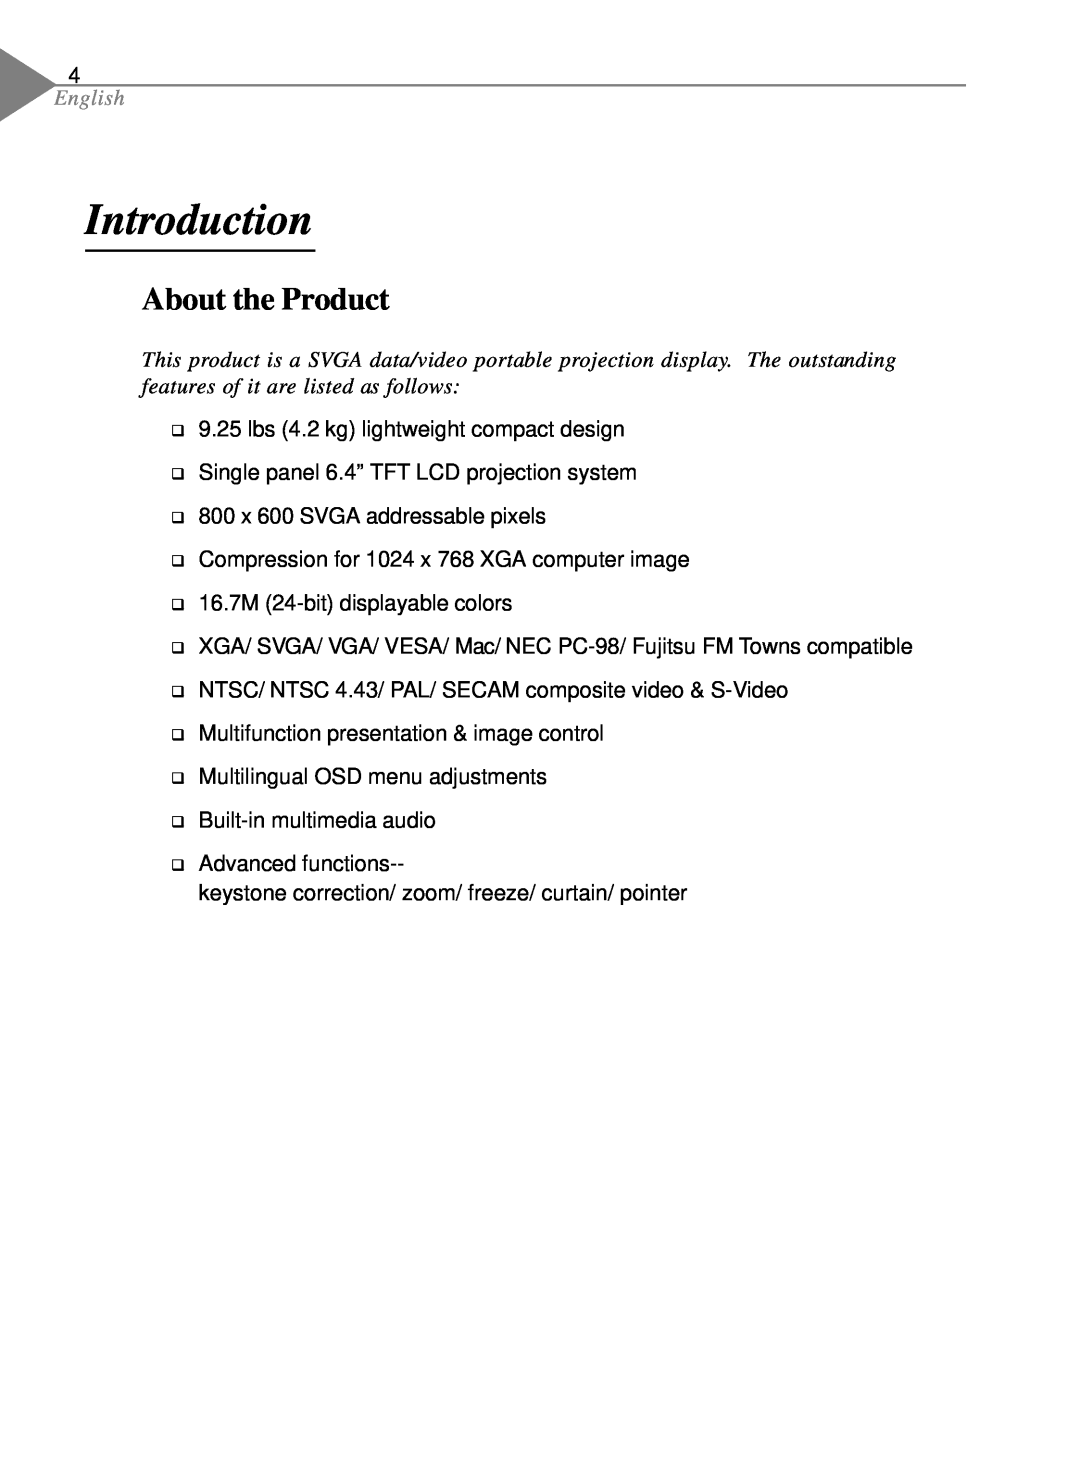 Optoma Technology EP550 specifications Introduction, About the Product, features of it are listed as follows, English 